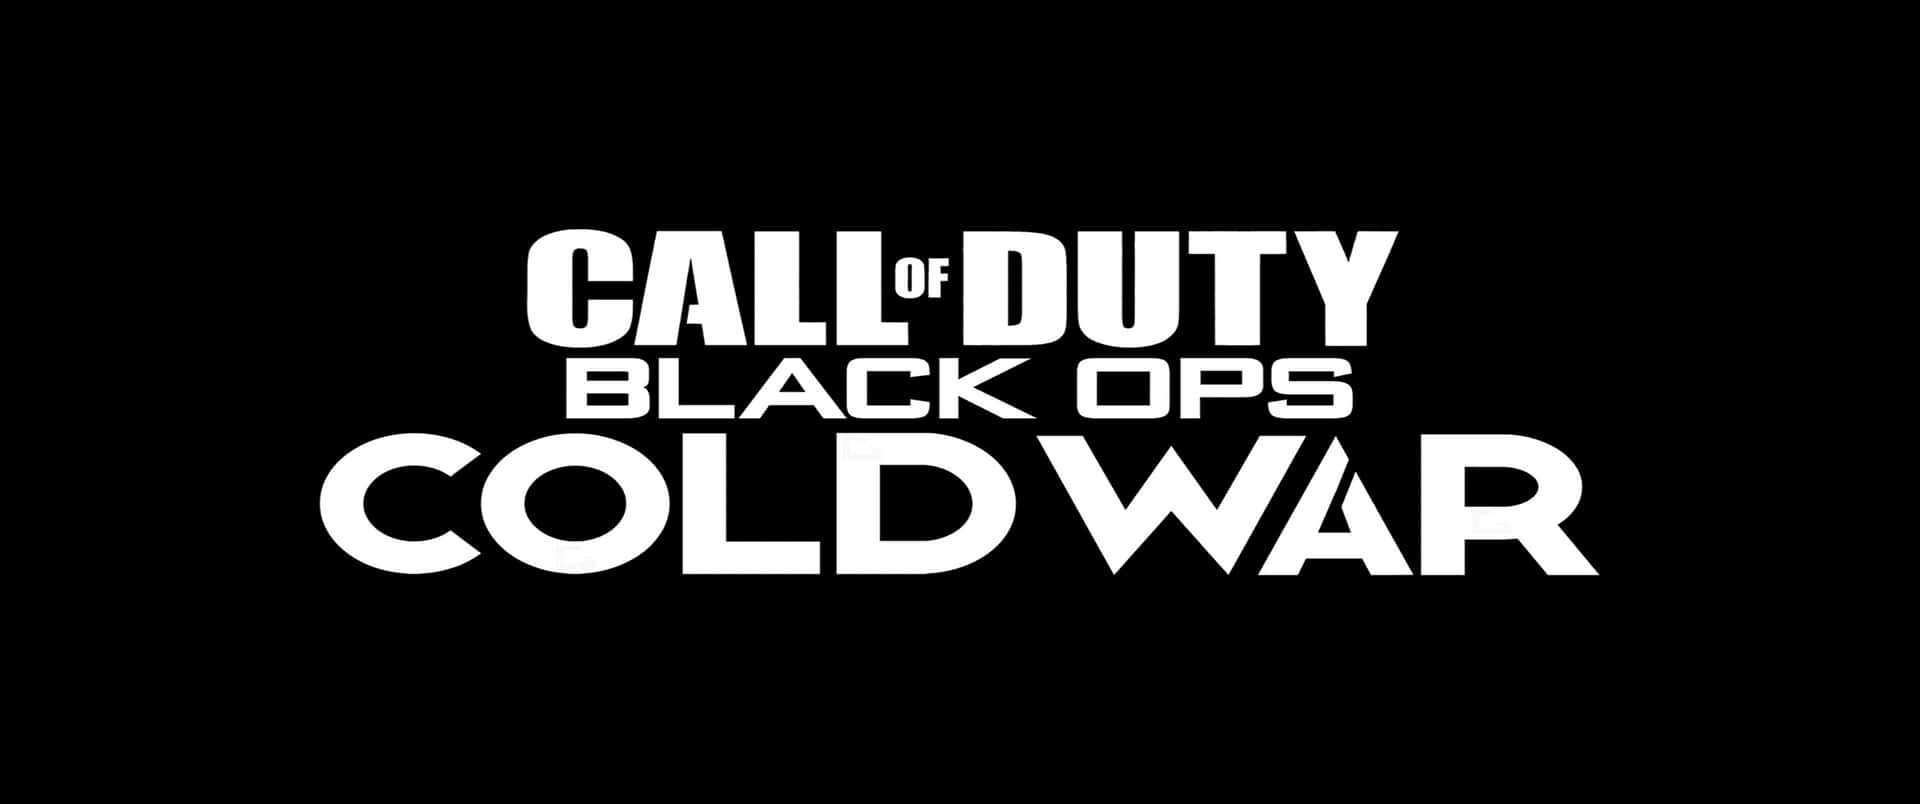 3440x1440p Call Of Duty Black Ops Cold War Background Wallpaper